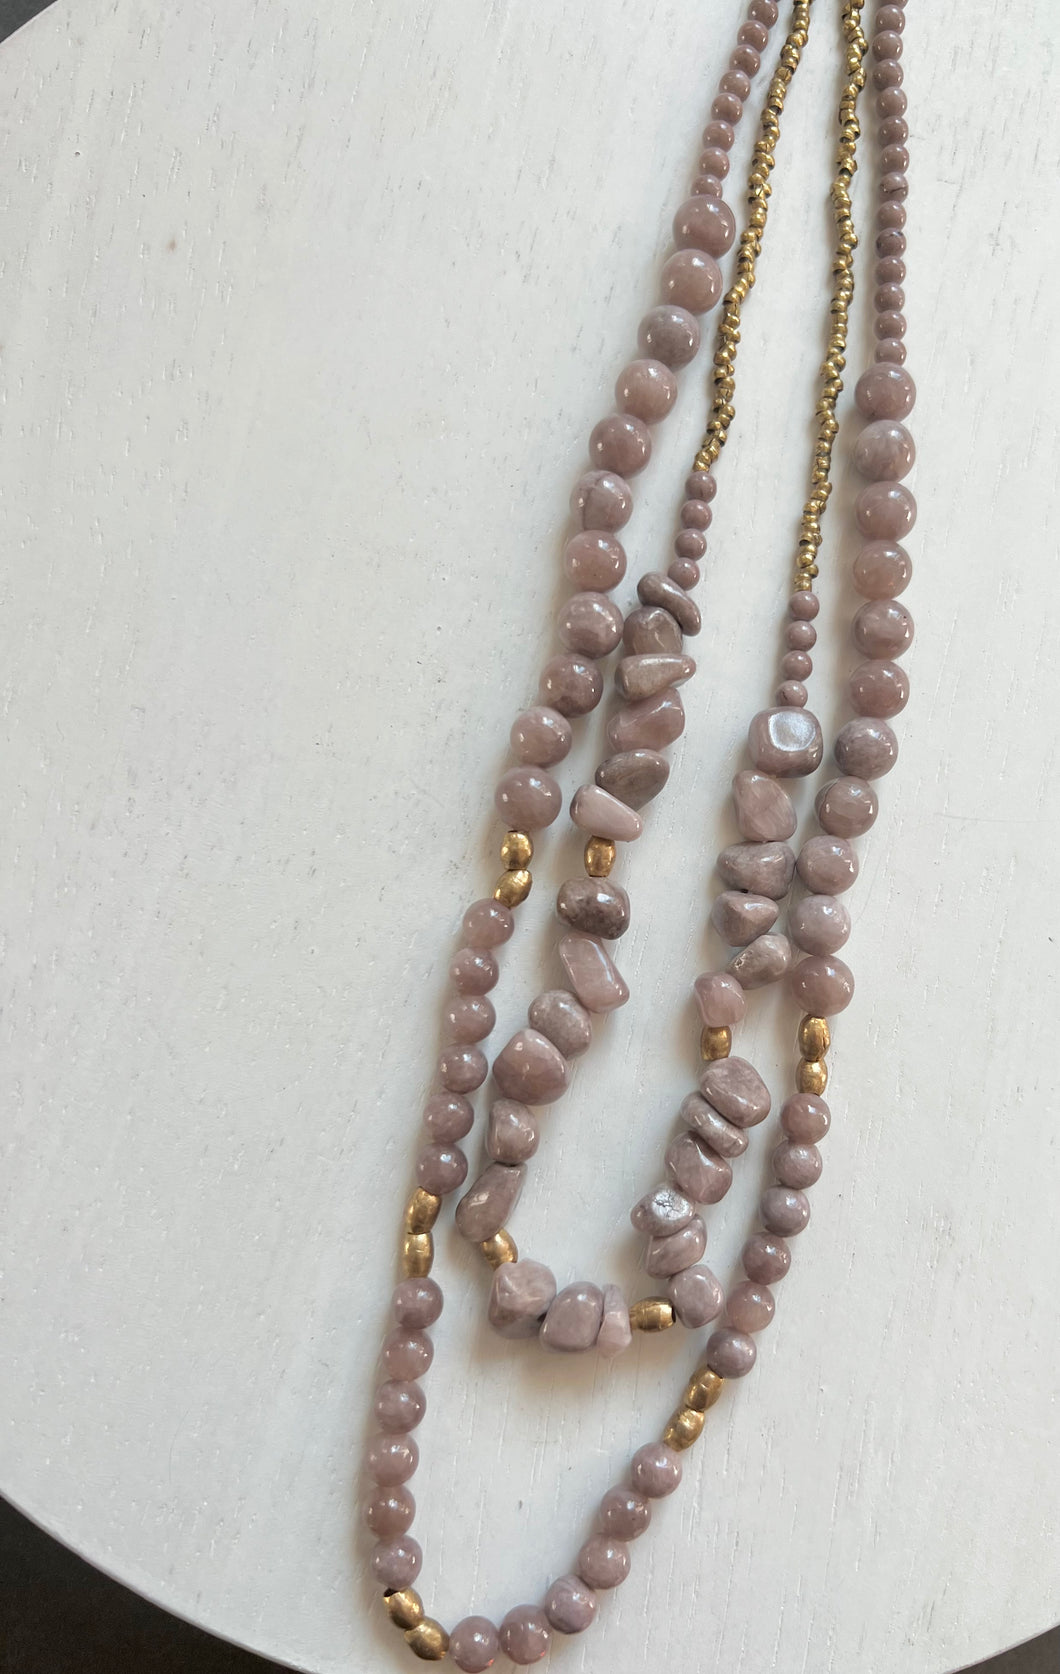 Dyed quartz with gold brass double necklaces